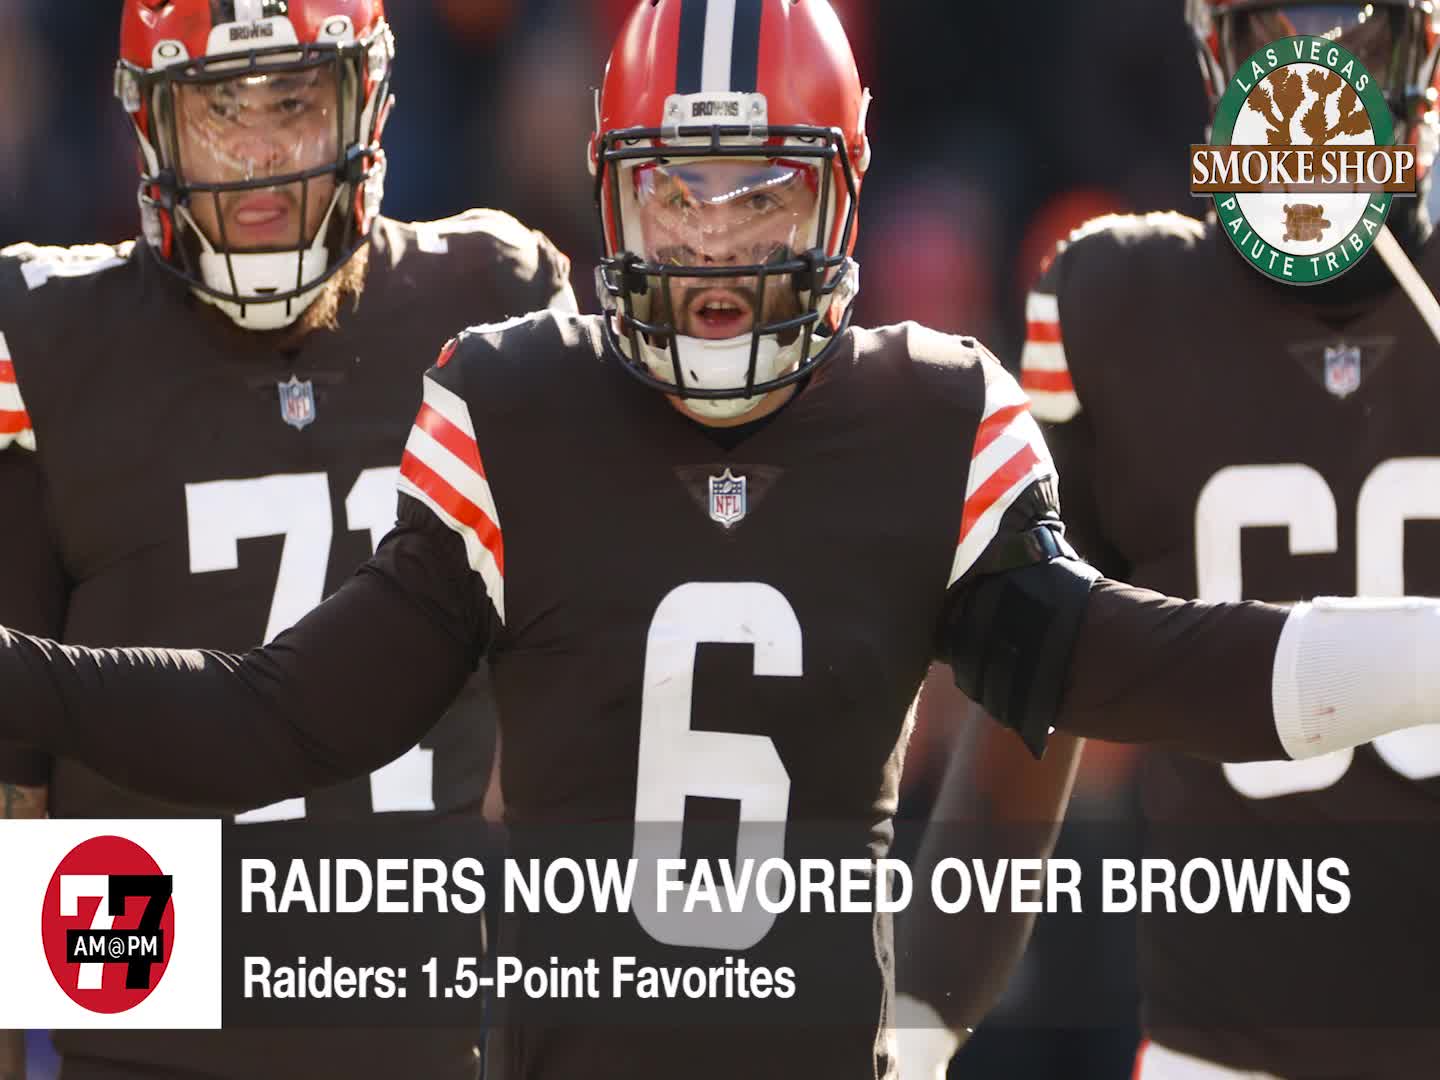 7@7PM Raiders Now Favored Over Browns